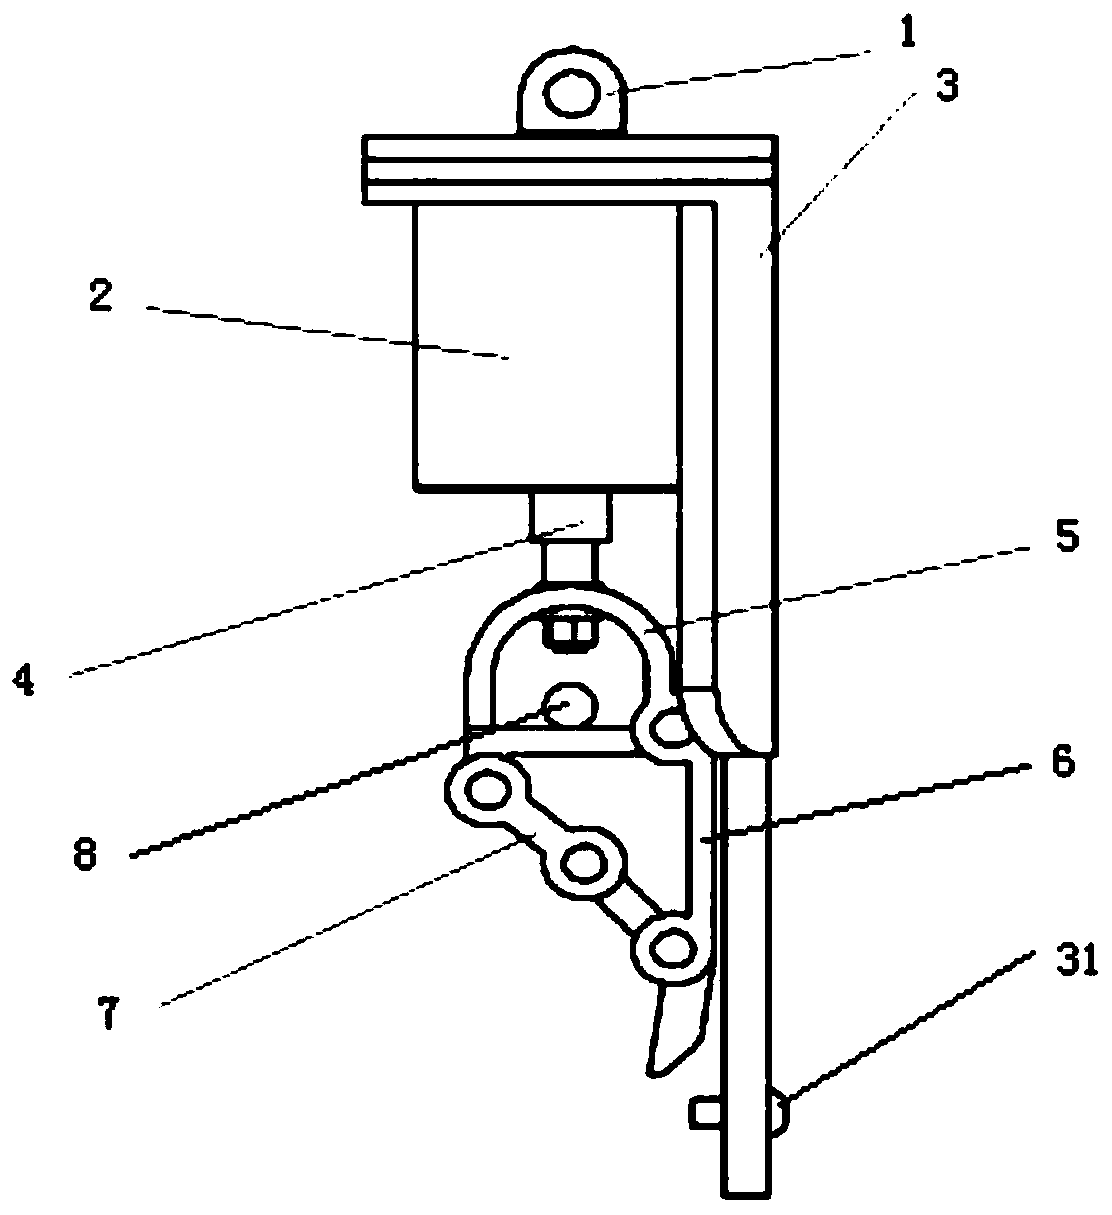 An off-line protection pole device for transmission line pole and tower structure